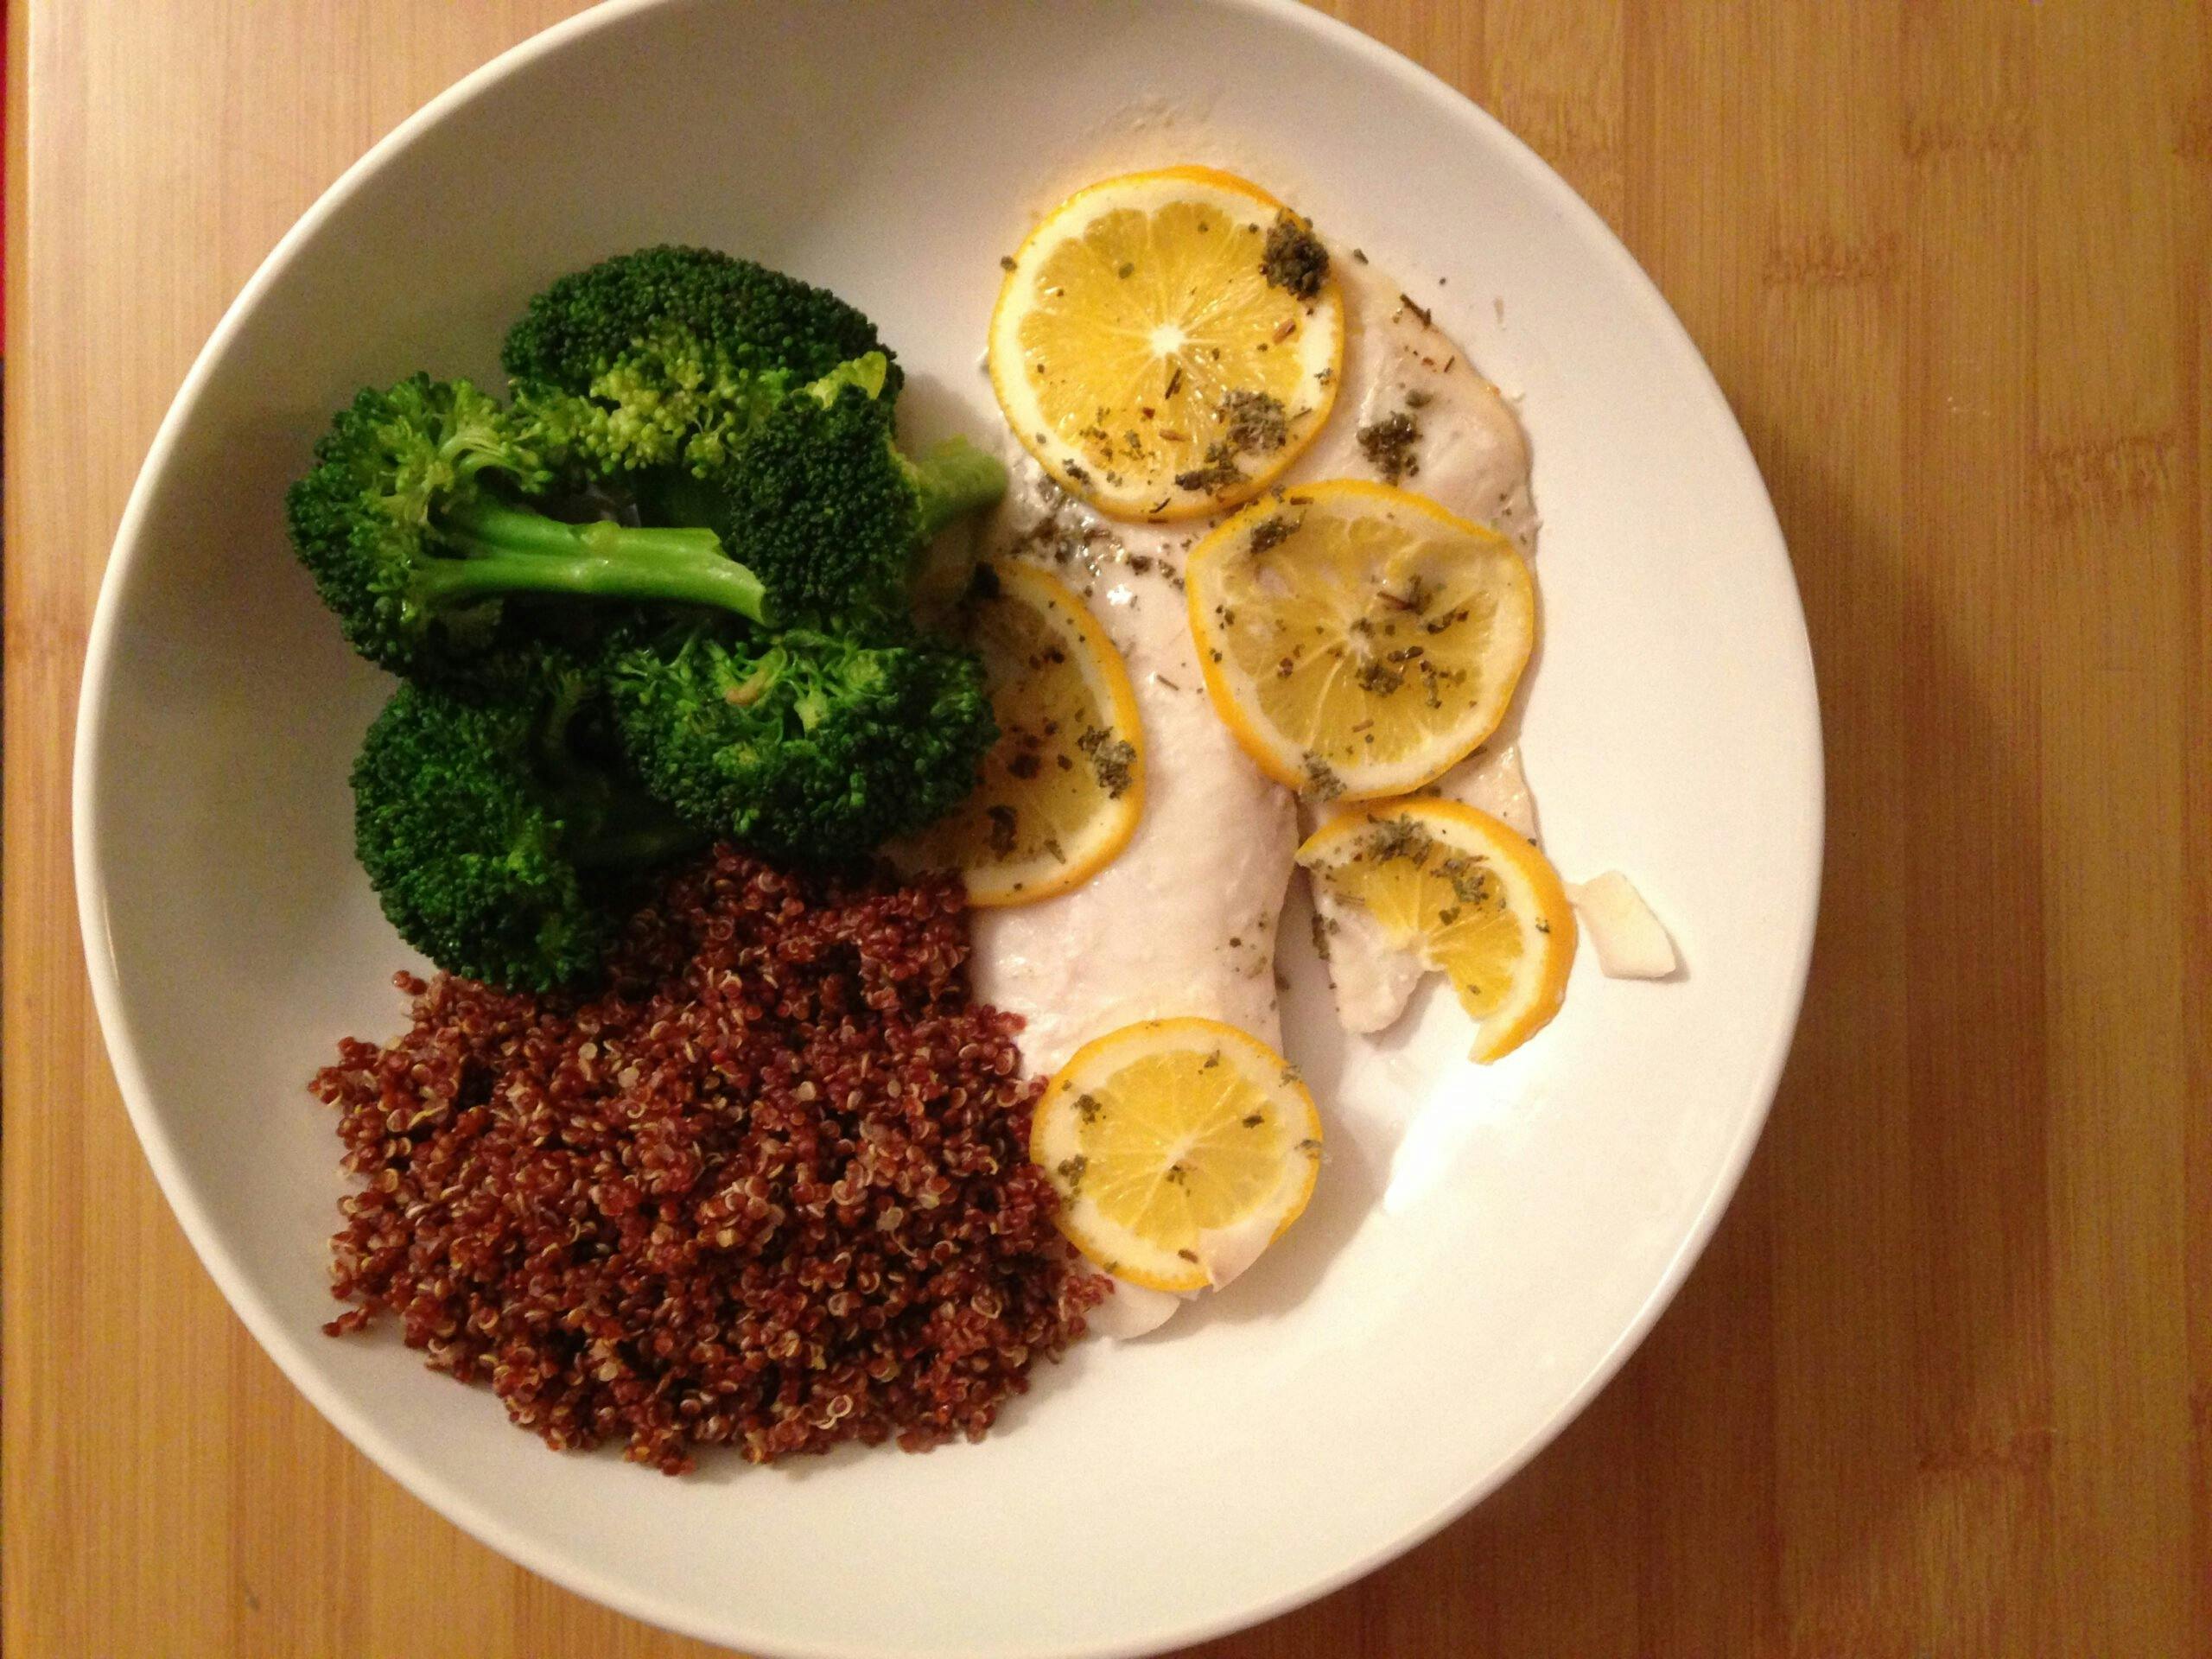 healthy-eating-dinner-fish-fresh-plated-birdseyeview_t20_X2Ay8z